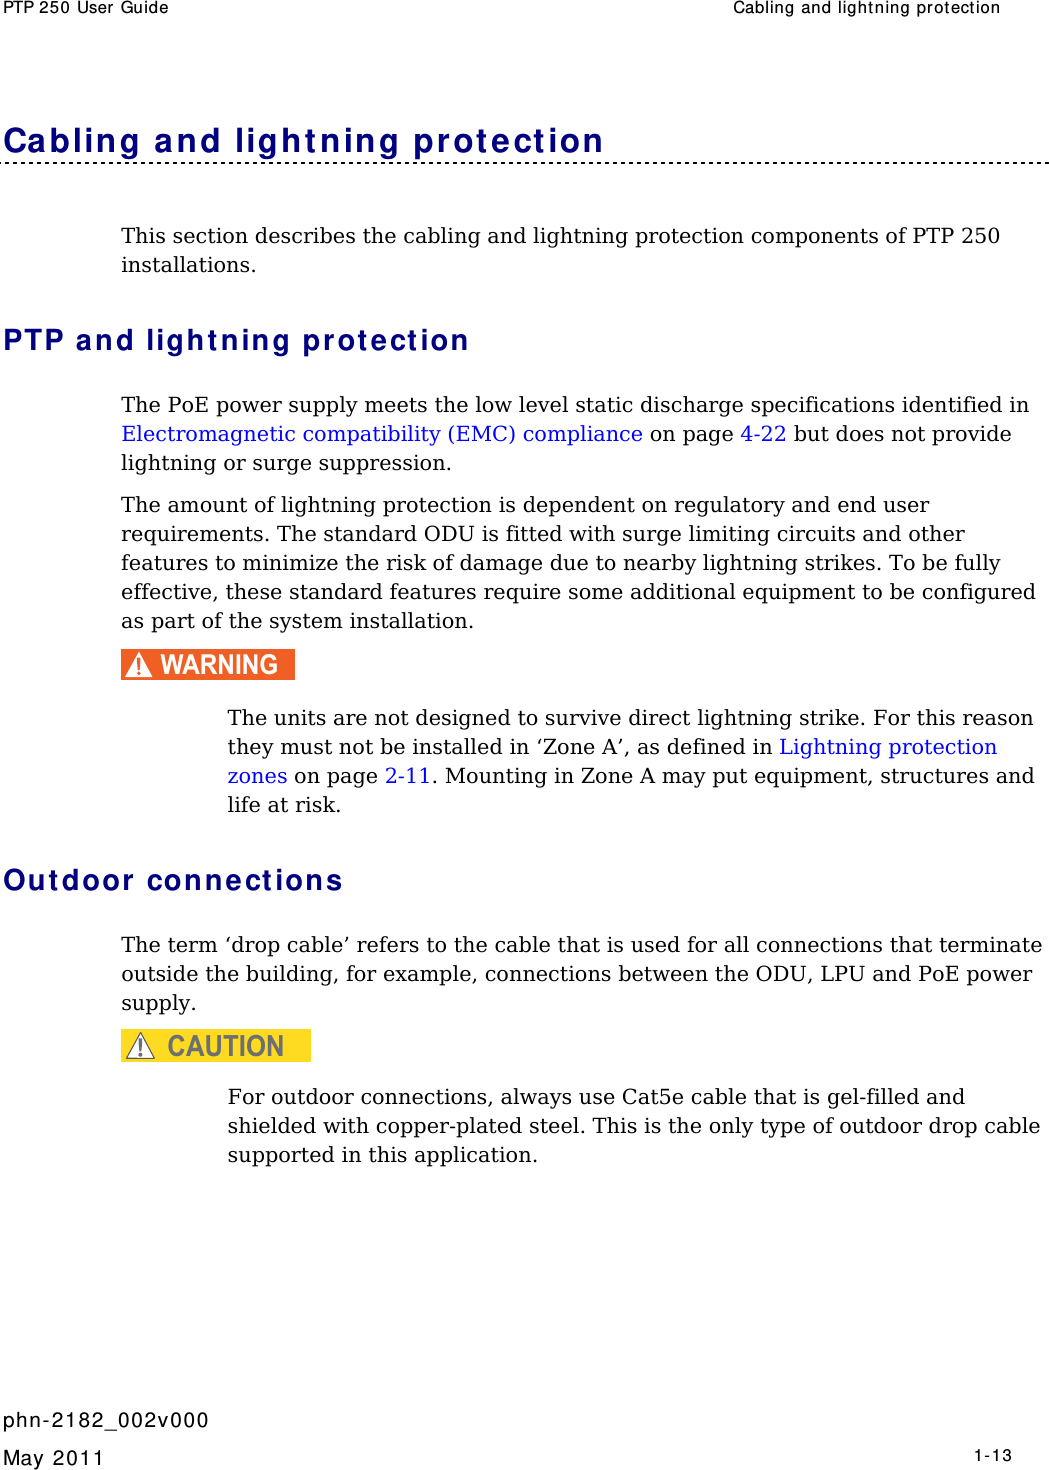 PTP 250 User Guide  Cabling and light ning prot ect ion   phn- 2182_002v000   May 2011   1-13  Cabling a nd light ning prot ection This section describes the cabling and lightning protection components of PTP 250 installations. PTP and light ning pr ot e ct ion  The PoE power supply meets the low level static discharge specifications identified in Electromagnetic compatibility (EMC) compliance on page 4-22 but does not provide lightning or surge suppression. The amount of lightning protection is dependent on regulatory and end user requirements. The standard ODU is fitted with surge limiting circuits and other features to minimize the risk of damage due to nearby lightning strikes. To be fully effective, these standard features require some additional equipment to be configured as part of the system installation. WARNING  The units are not designed to survive direct lightning strike. For this reason they must not be installed in ‘Zone A’, as defined in Lightning protection zones on page 2-11. Mounting in Zone A may put equipment, structures and life at risk. Out door connections The term ‘drop cable’ refers to the cable that is used for all connections that terminate outside the building, for example, connections between the ODU, LPU and PoE power supply. CAUTION For outdoor connections, always use Cat5e cable that is gel-filled and shielded with copper-plated steel. This is the only type of outdoor drop cable supported in this application. 